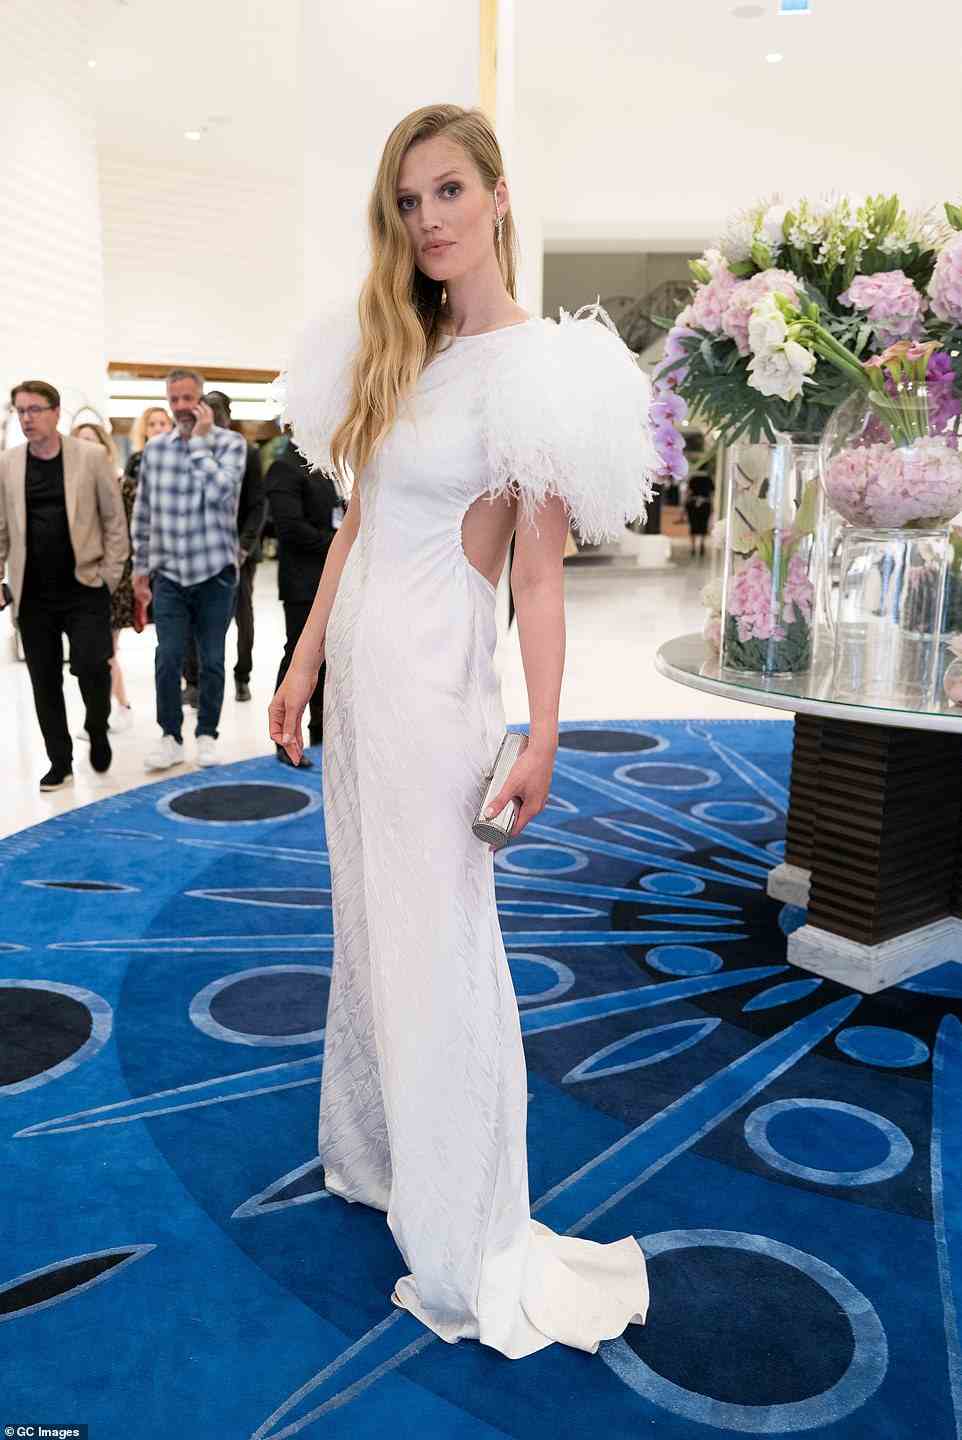 Radiant: Toni Garn looked lovely in a slinky white dress with feathered detailing